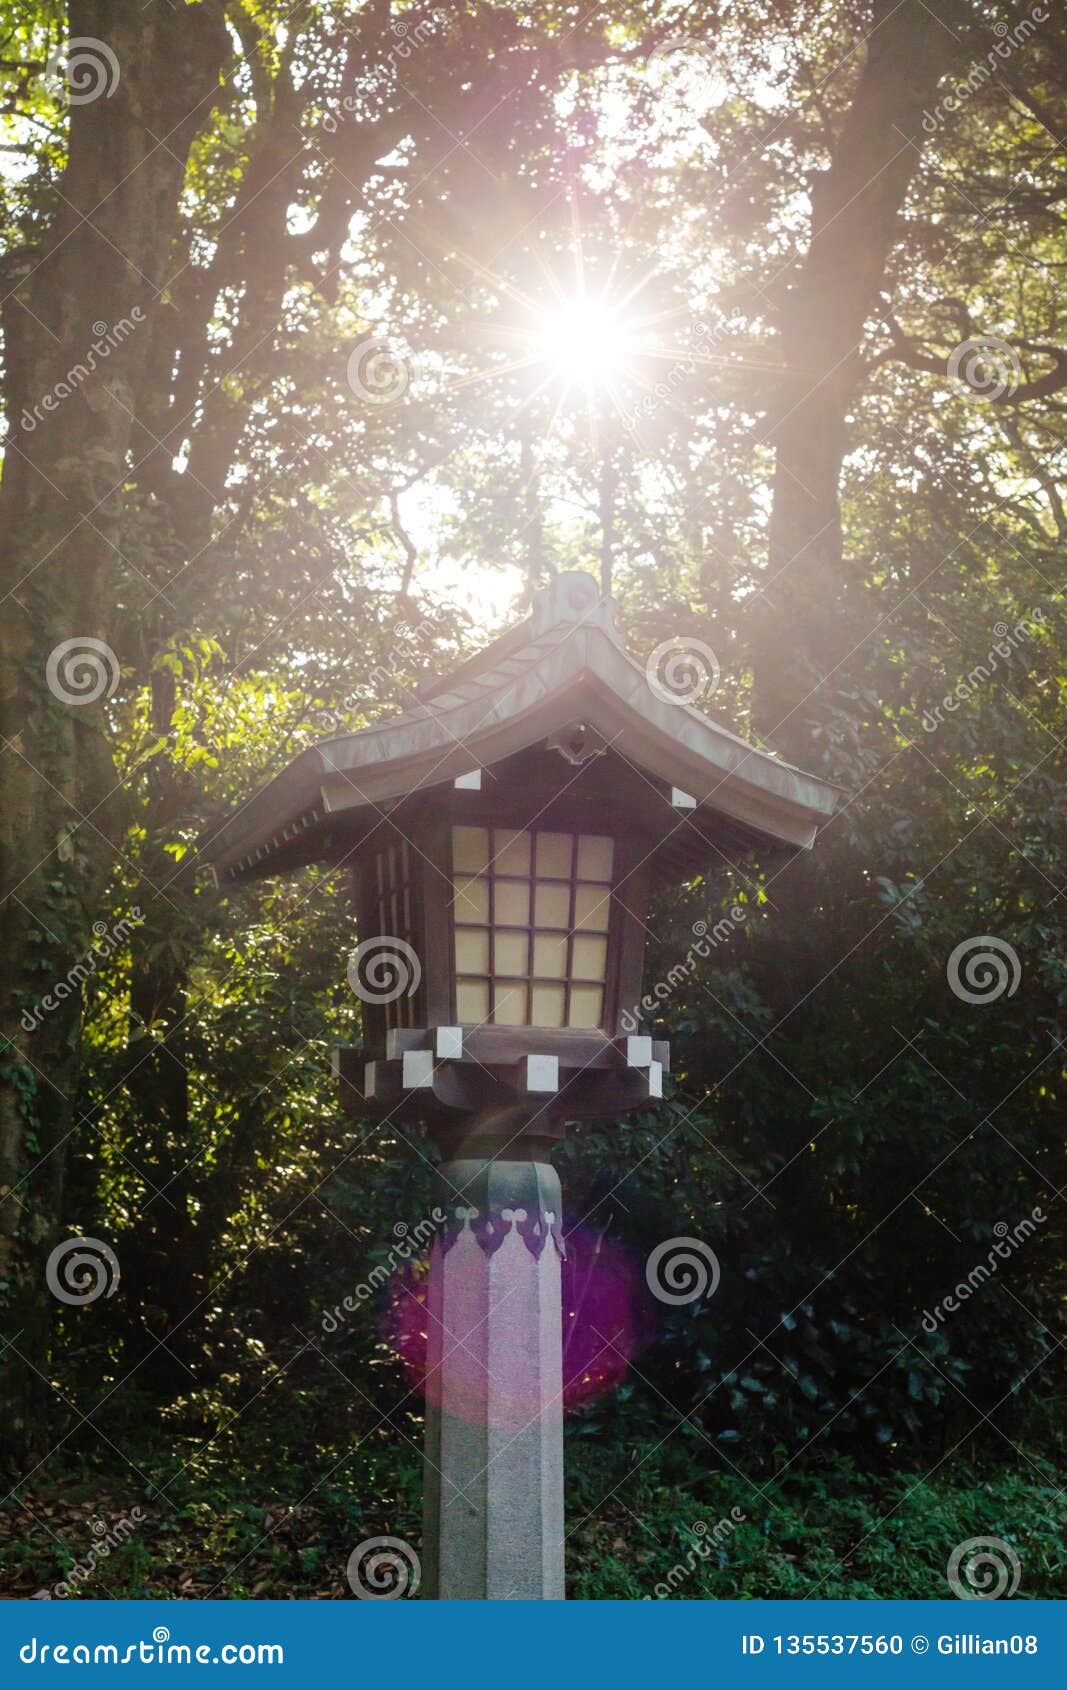 Lampost at shrine stock photo. Image of people, simple - 135537560